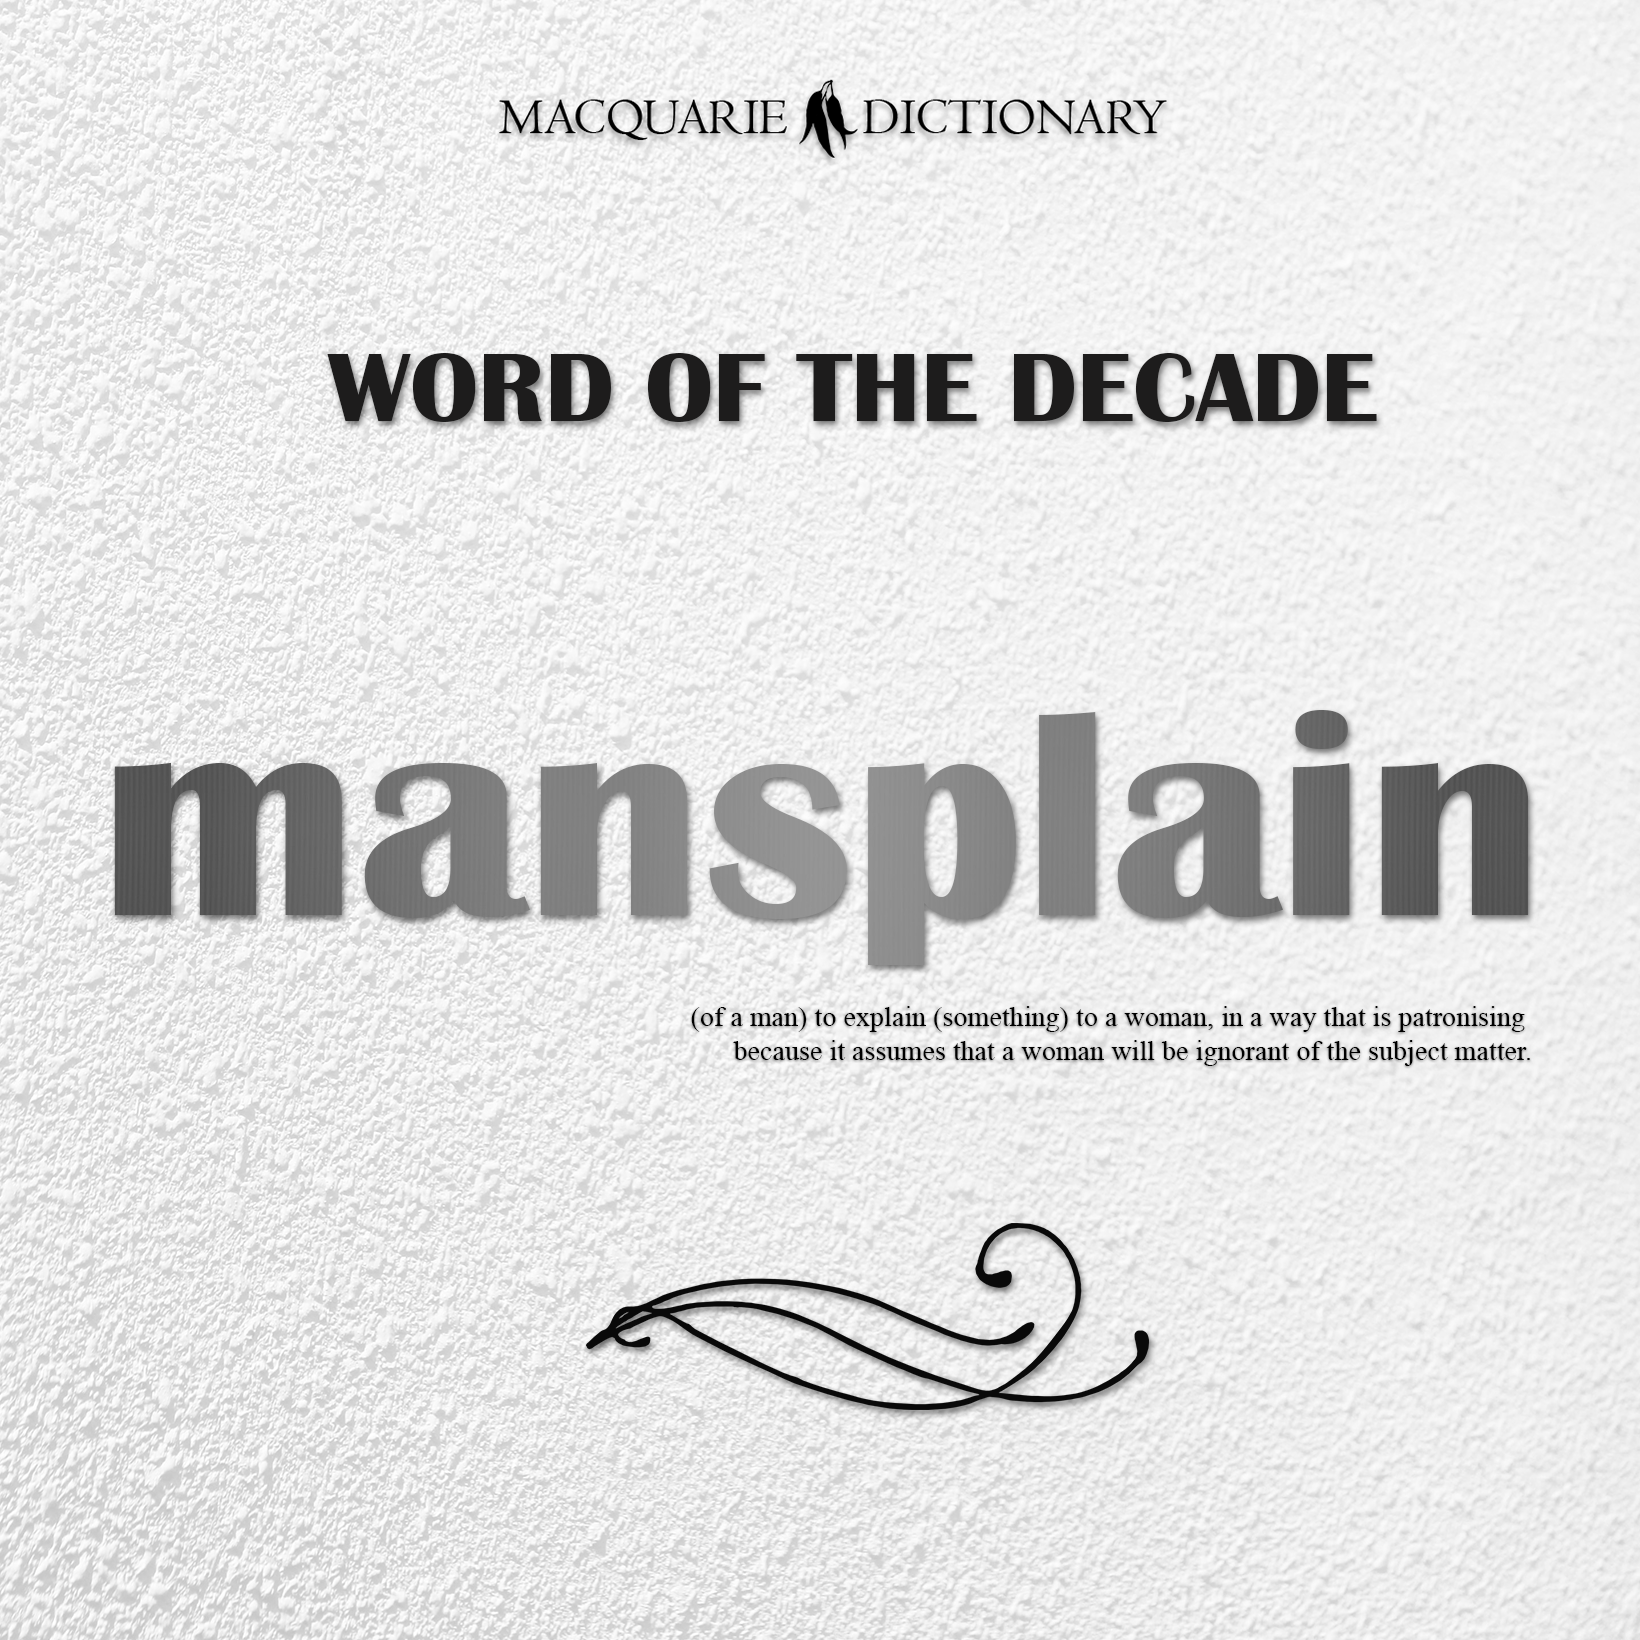 mansplain - (of a man) to explain (something) to a woman, in a way that is patronising because it assumes that a woman will be ignorant of the subject matter.